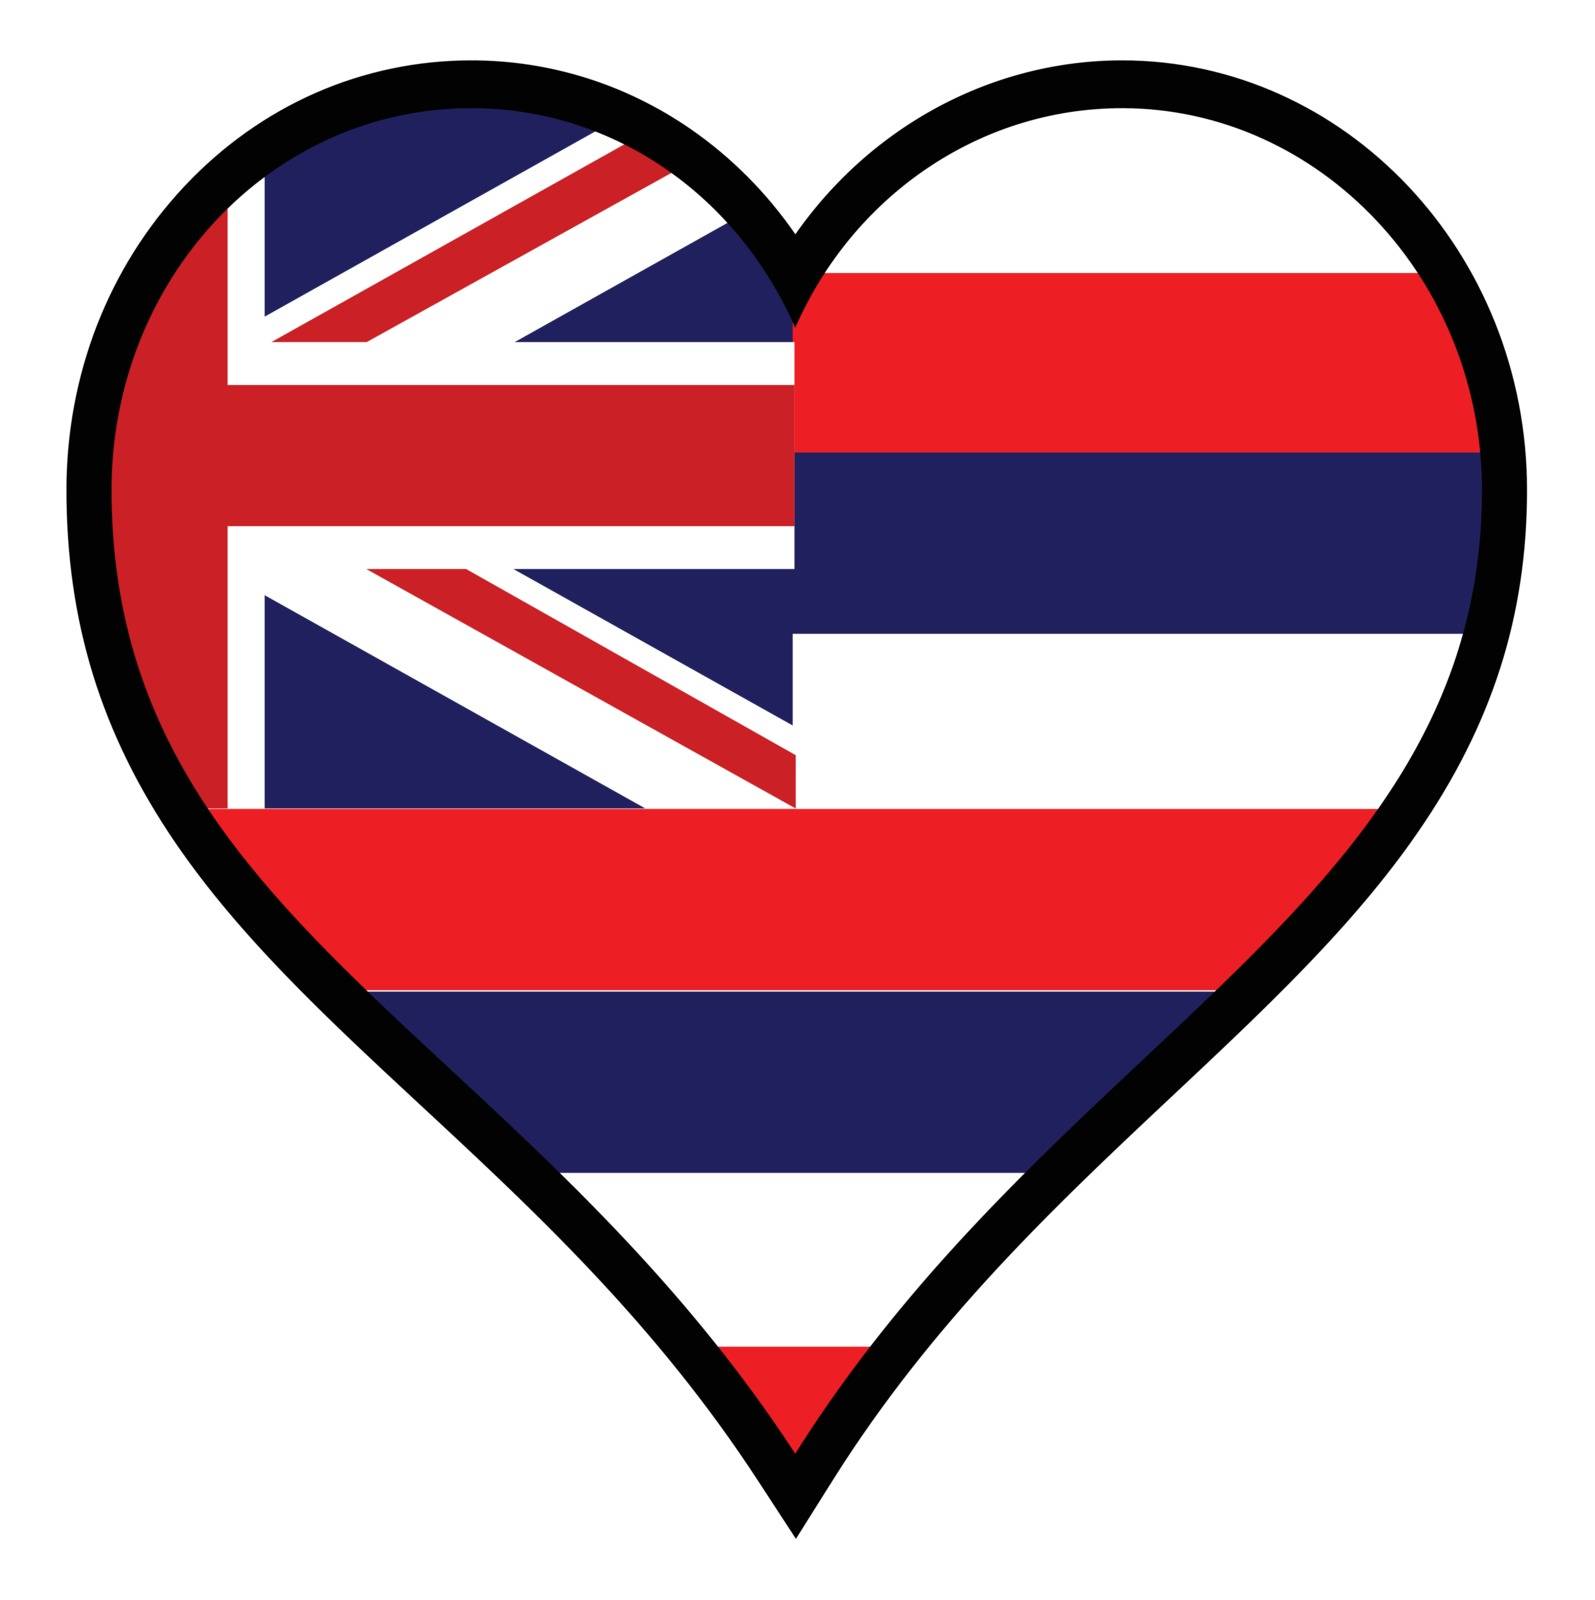 Hawaii state flag within a heart all over a white background